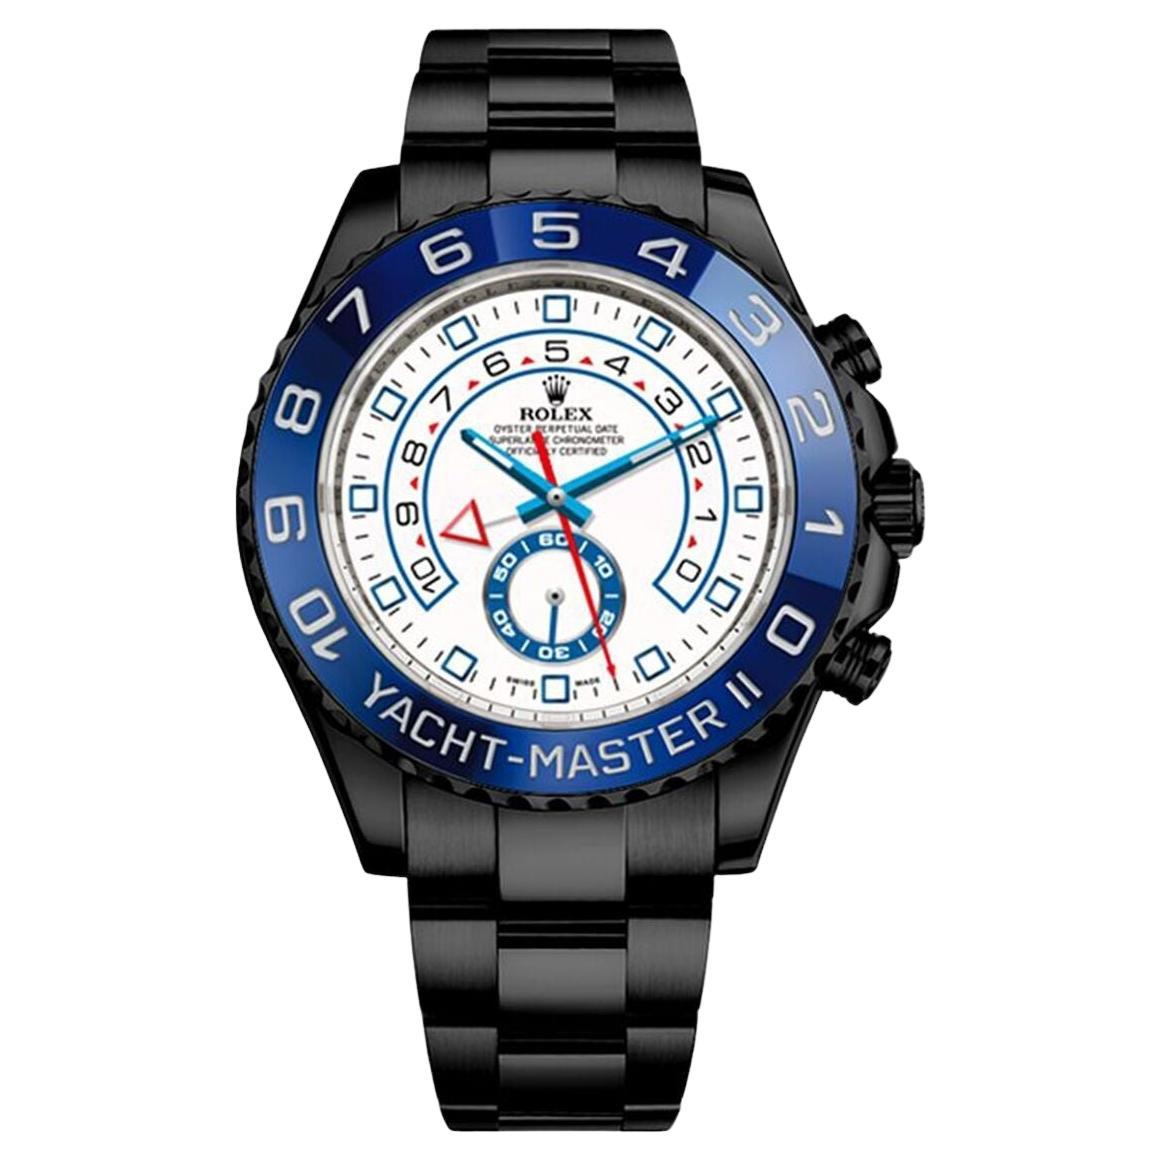 Rolex Yacht-Master II PVD/DLC Coated Stainless Steel Watch 116680 For Sale